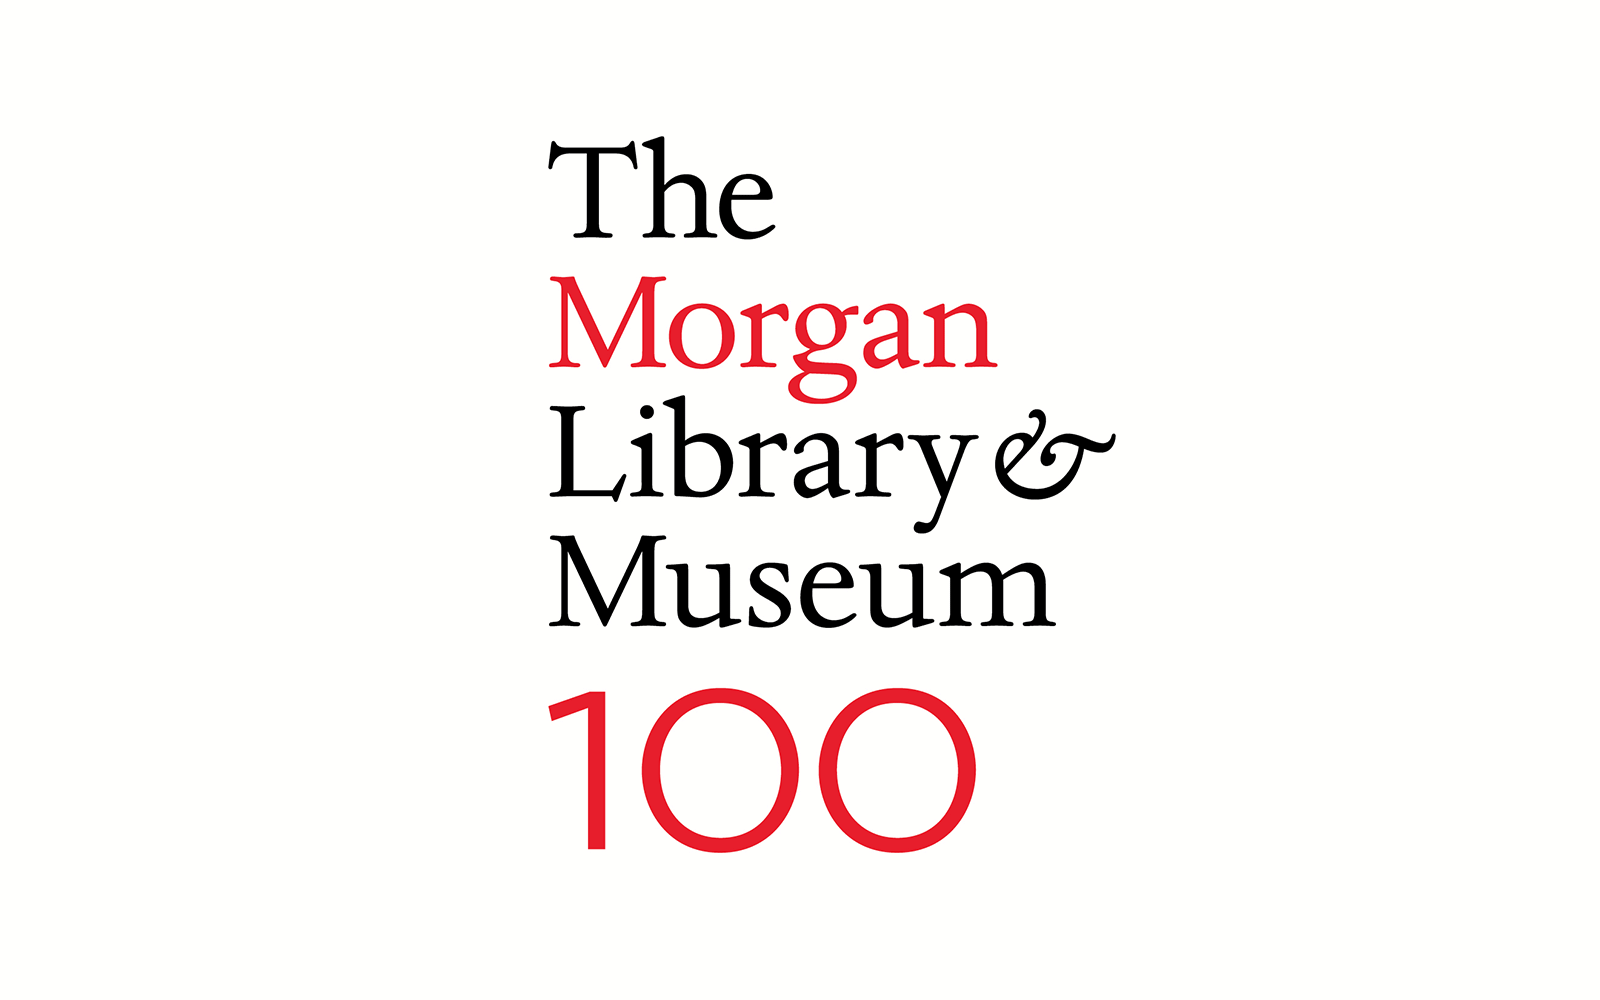 The Morgan Library & Museum 100